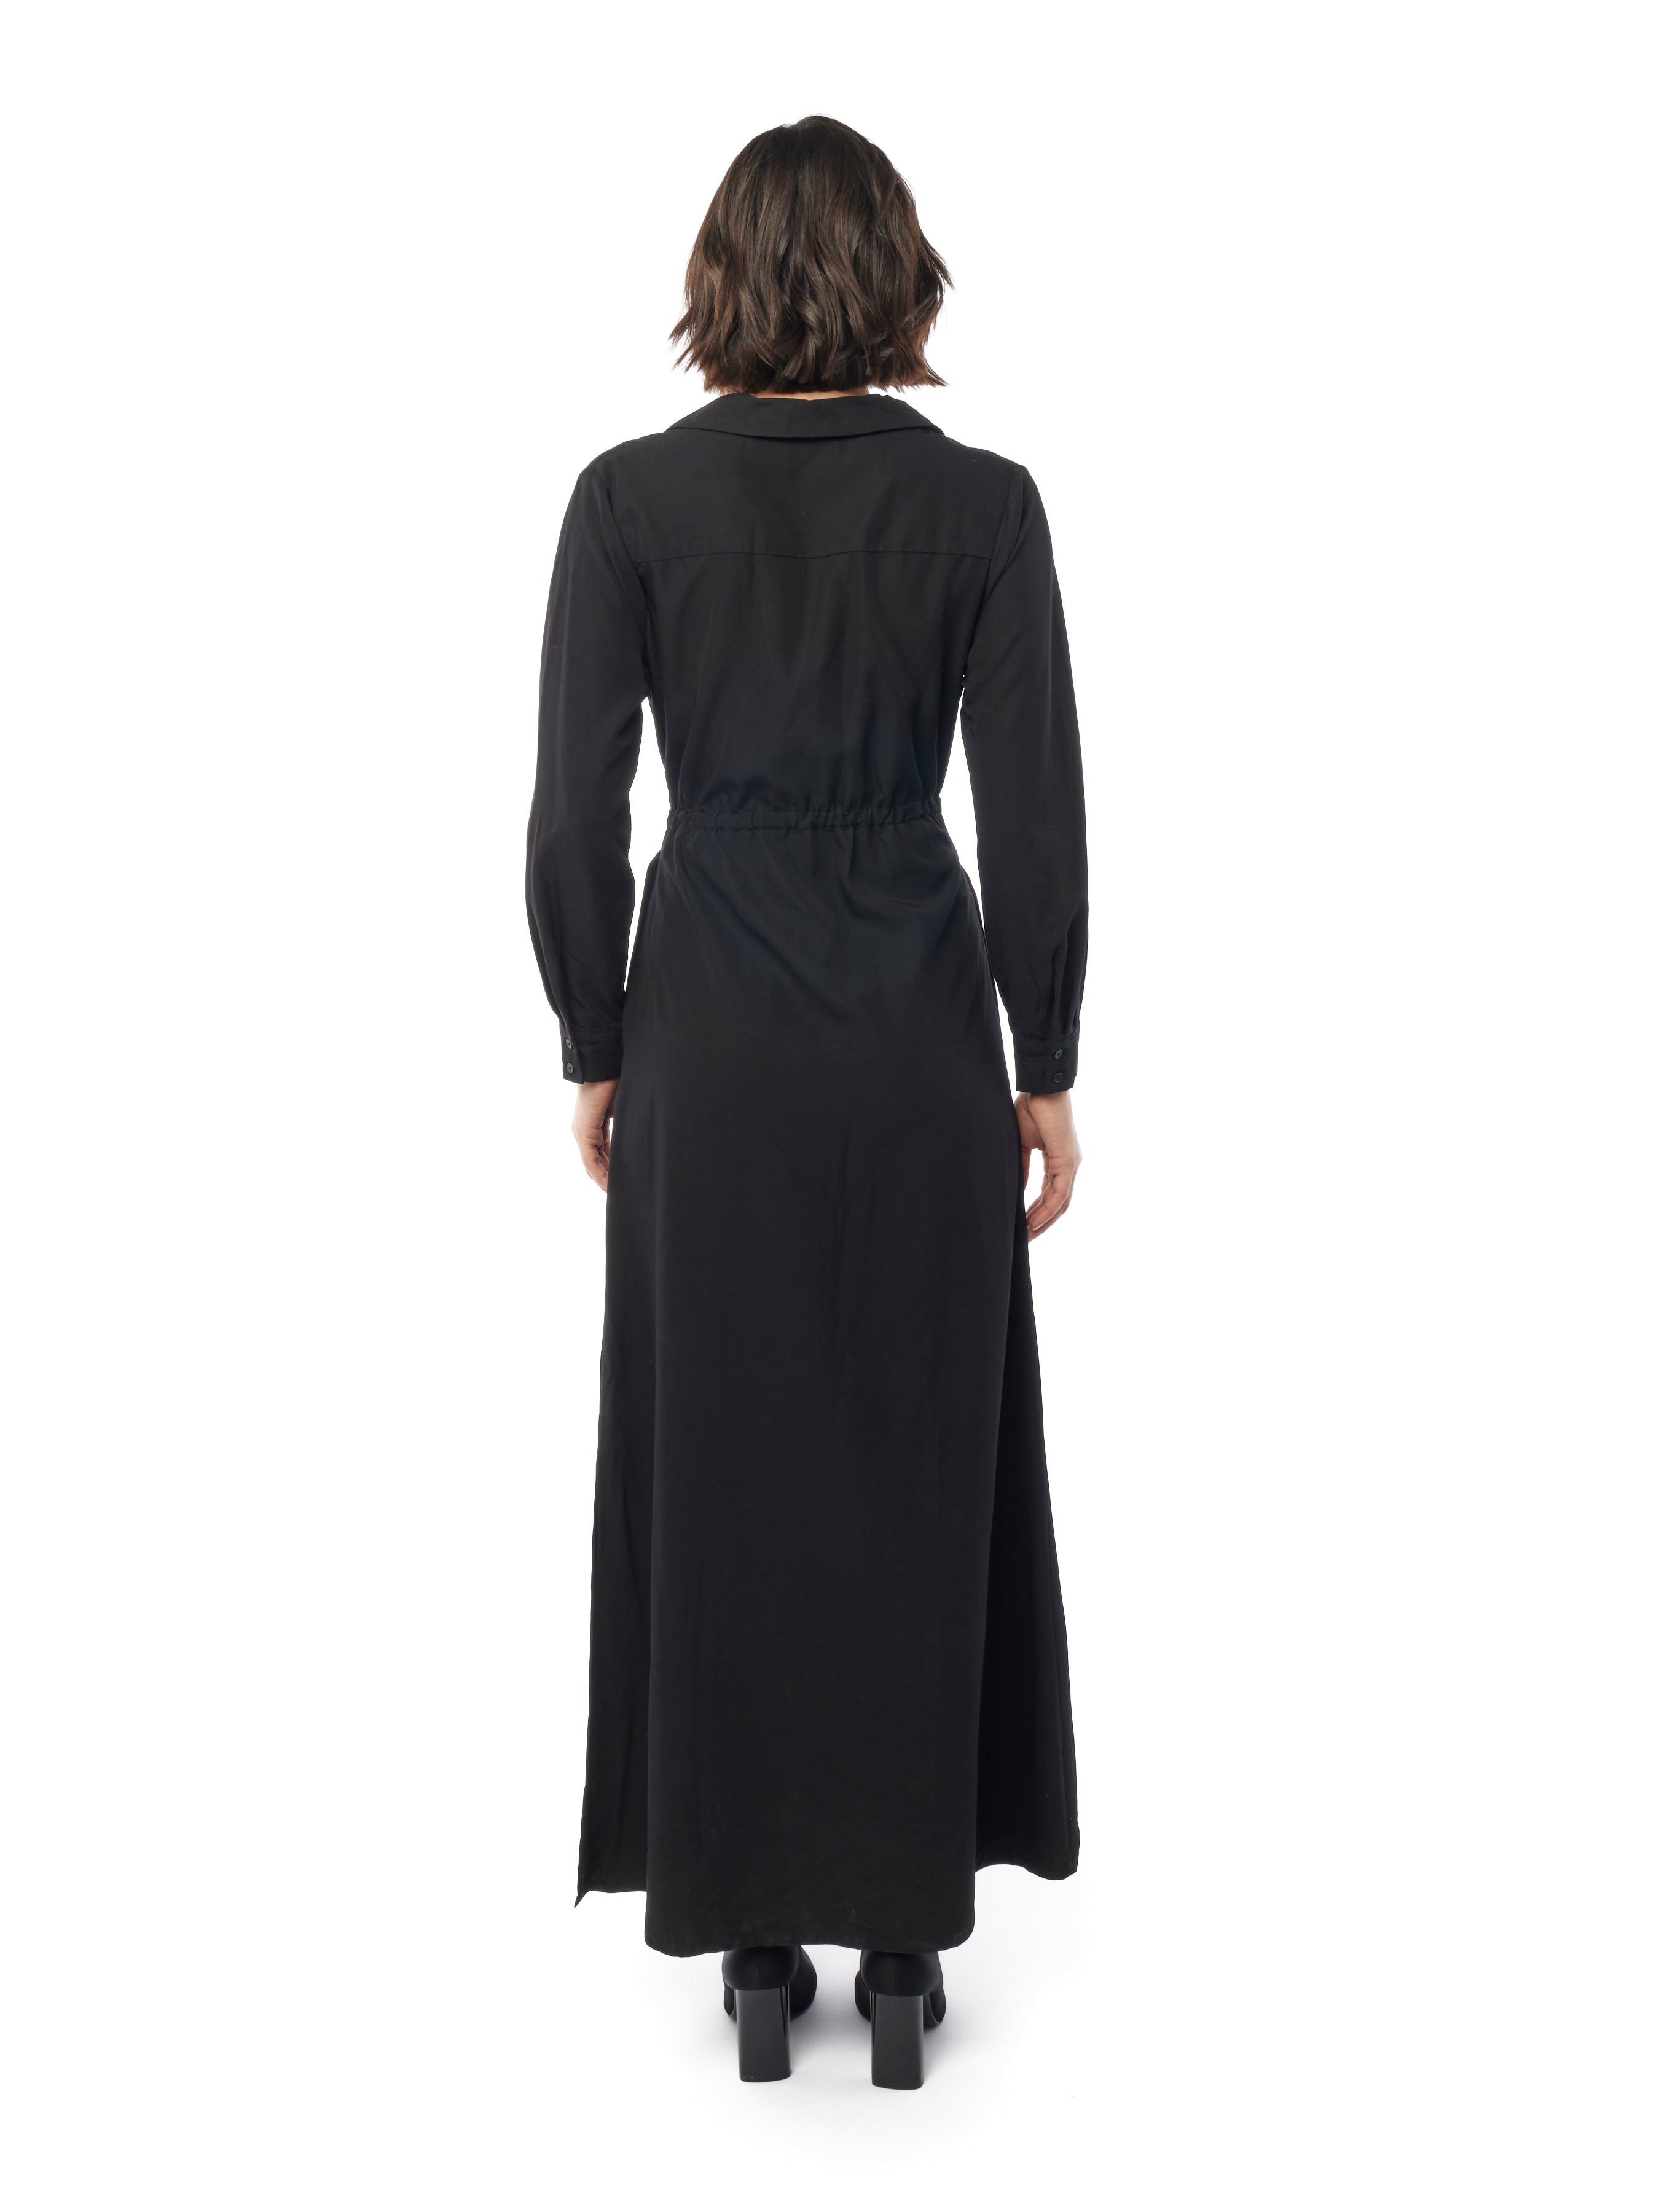 Long collared black dress with button down front, long cuffed sleeves and pockets. back view